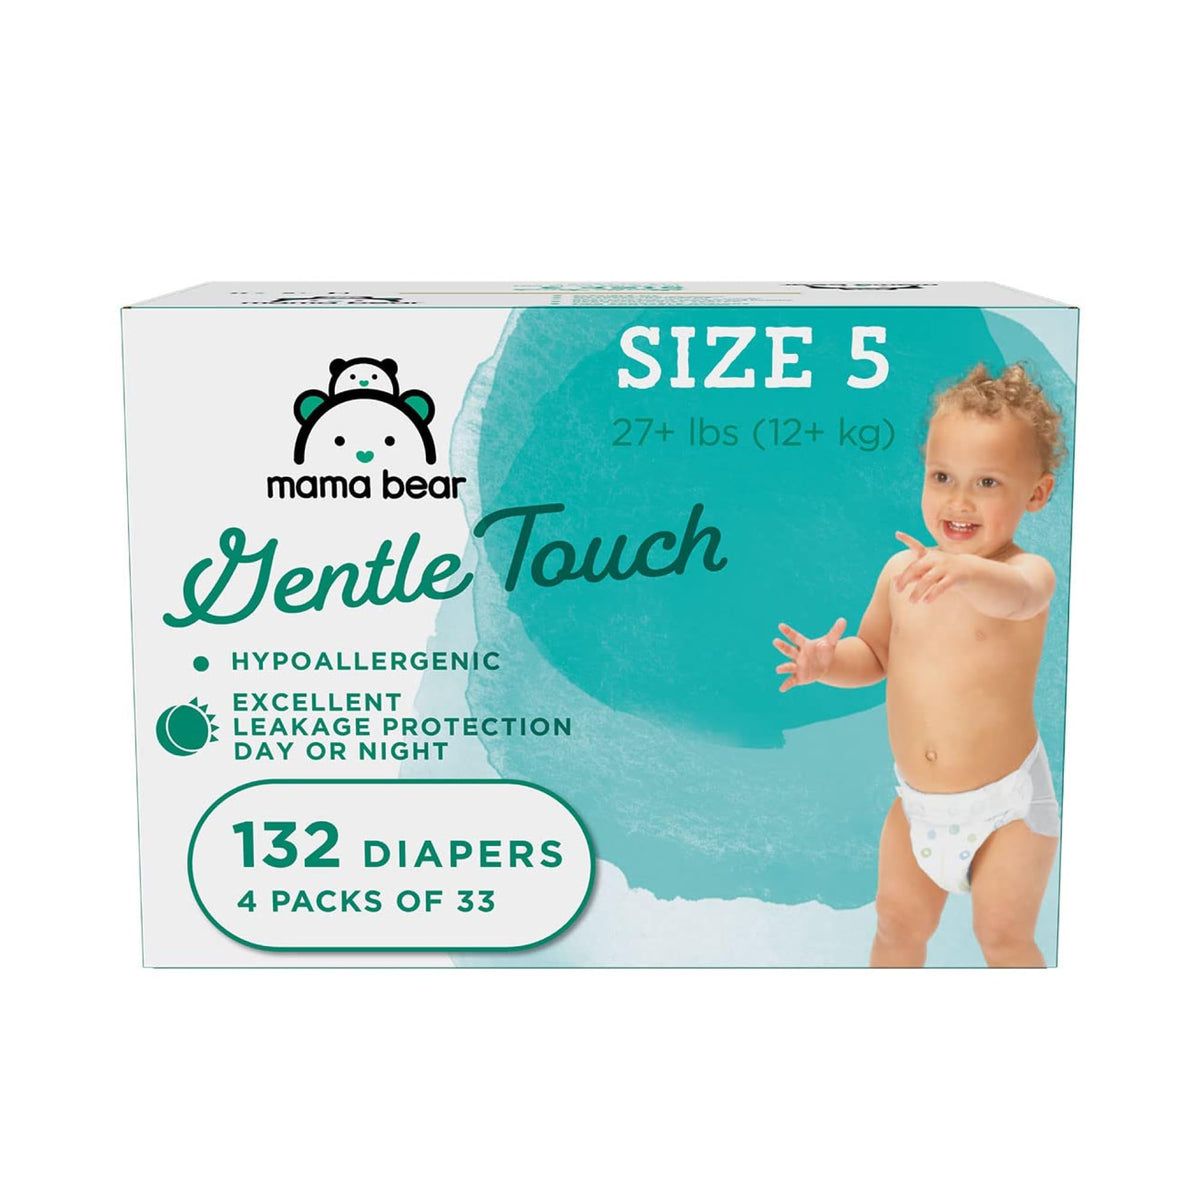 Amazon Brand - Mama Bear Gentle Touch Diapers, Hypoallergenic, Size 5, White, 132 Count (4 packs of 33)